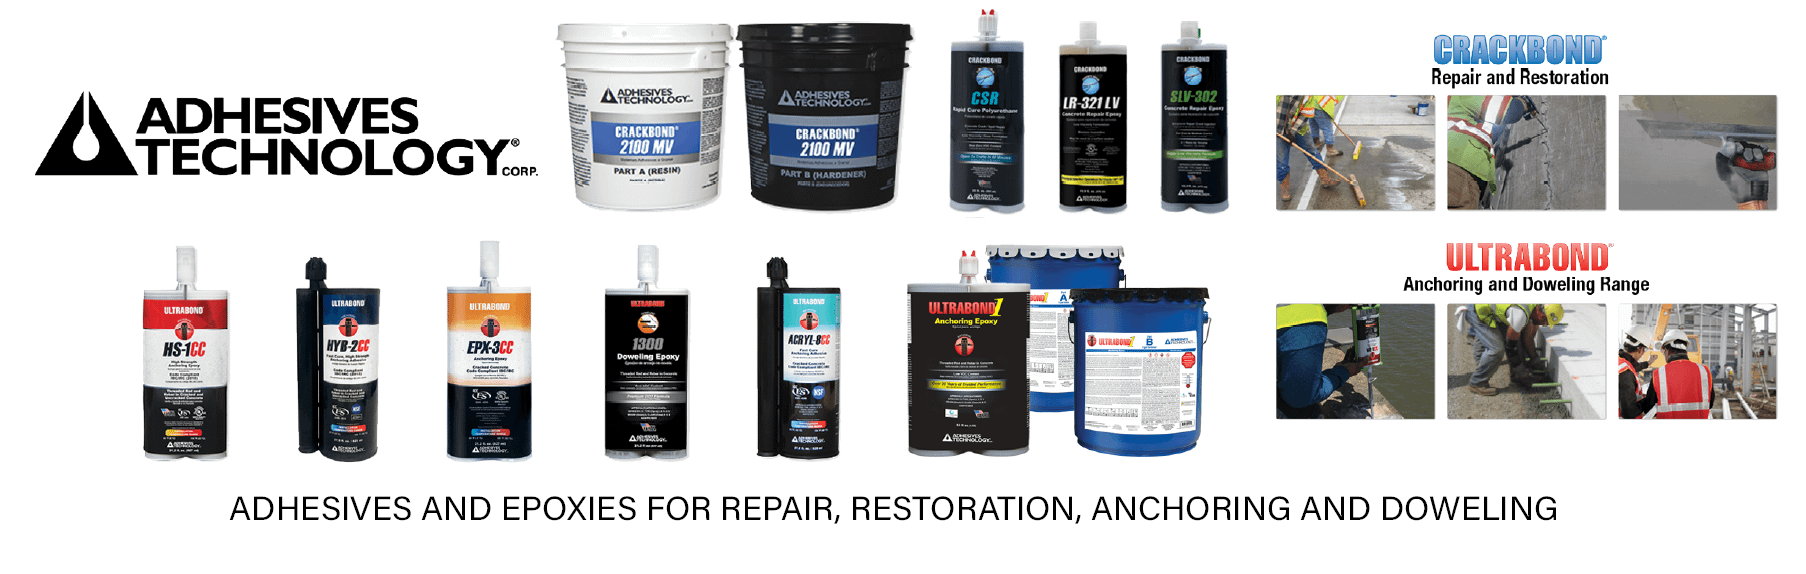 NACH Marketing - Adhesives Technology - Adhesives and Epoxies for Repair, Restoration, Anchoring, and Doweling